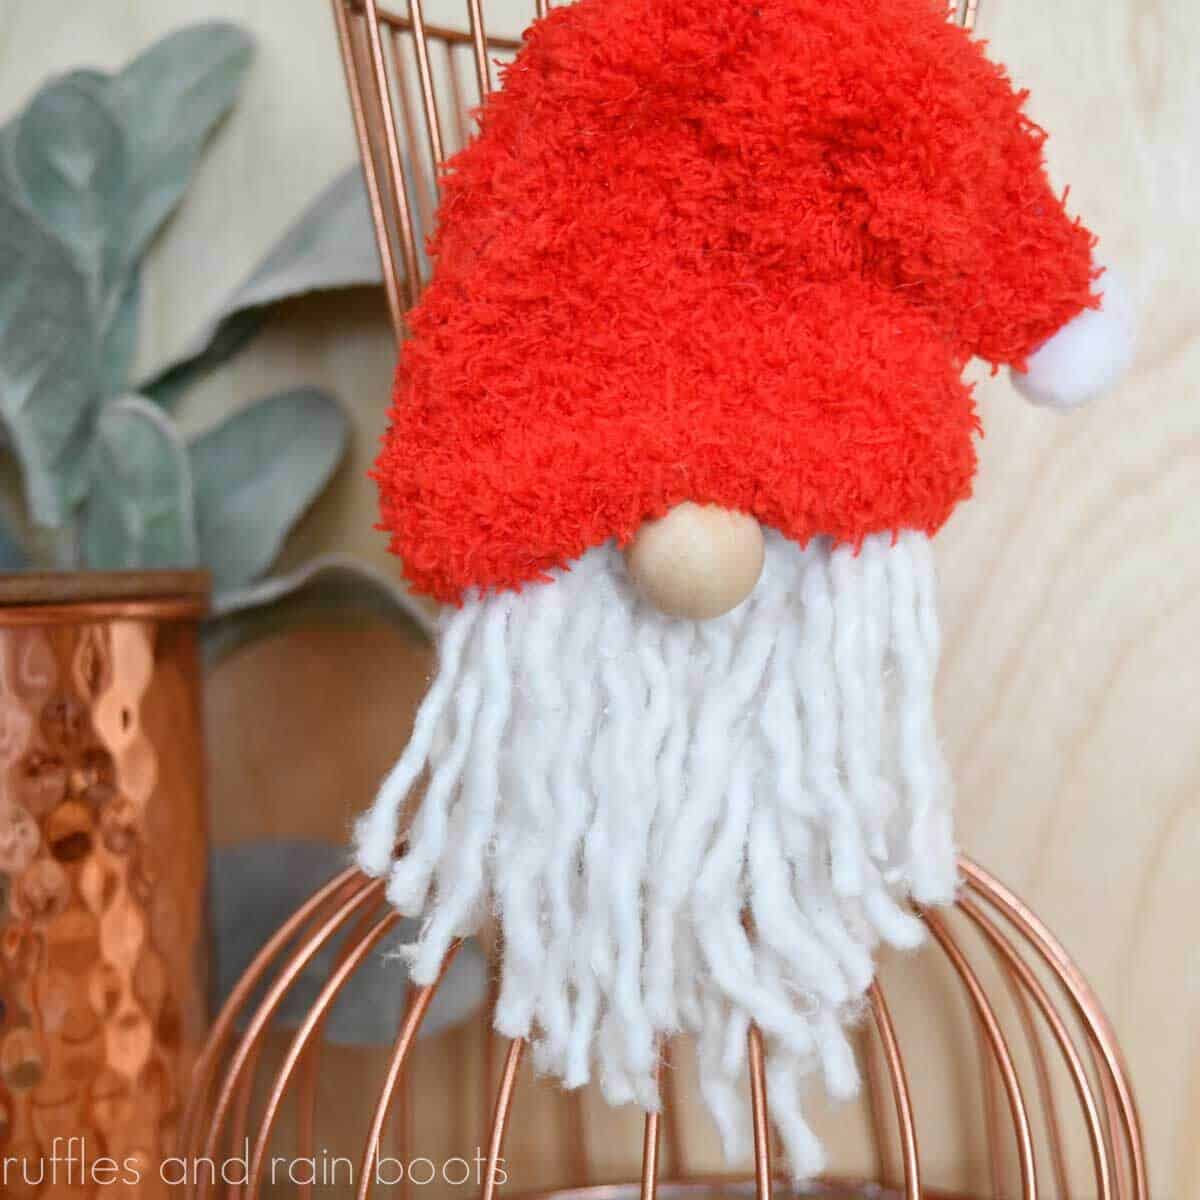 Red hat gnome ornament made from a curtain ring hanging on copper vase with greenery in front of light wood background.